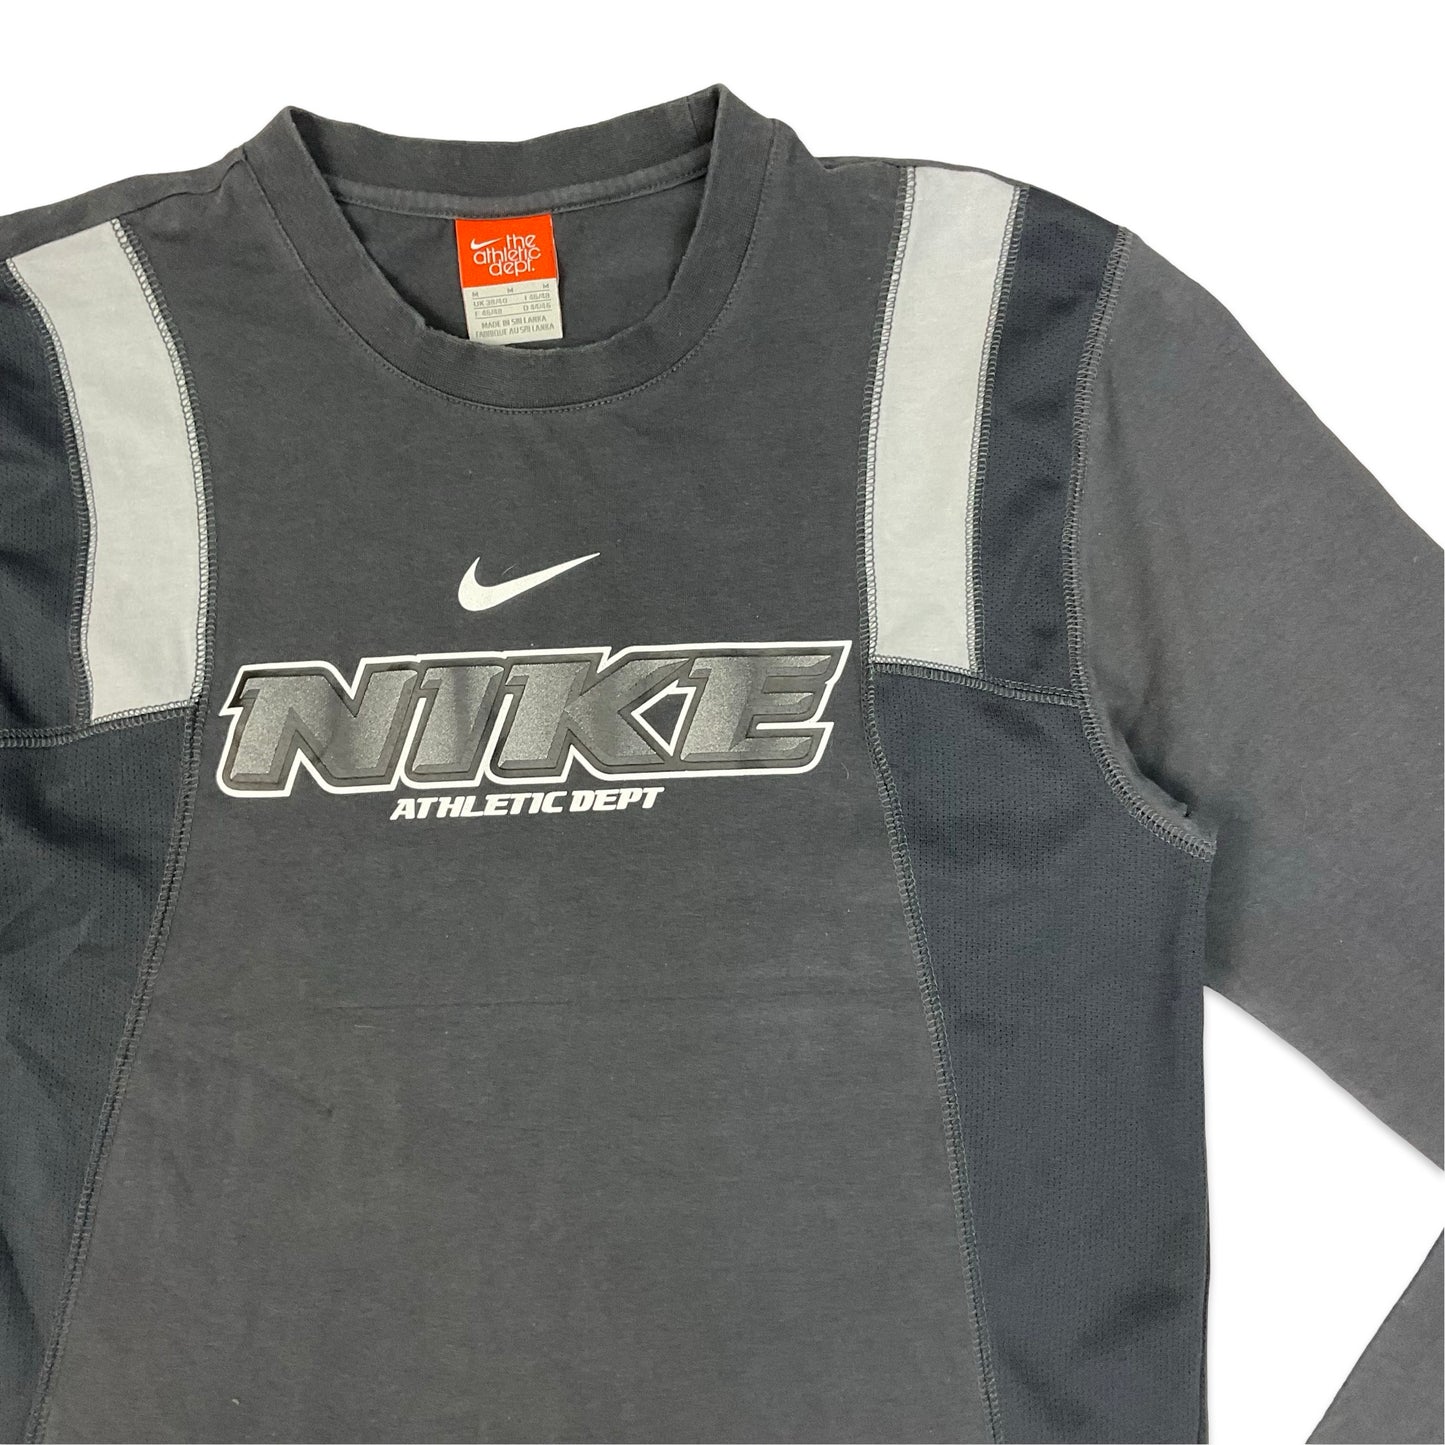 Nike Grey Long Sleeved Spell Out Tee S M